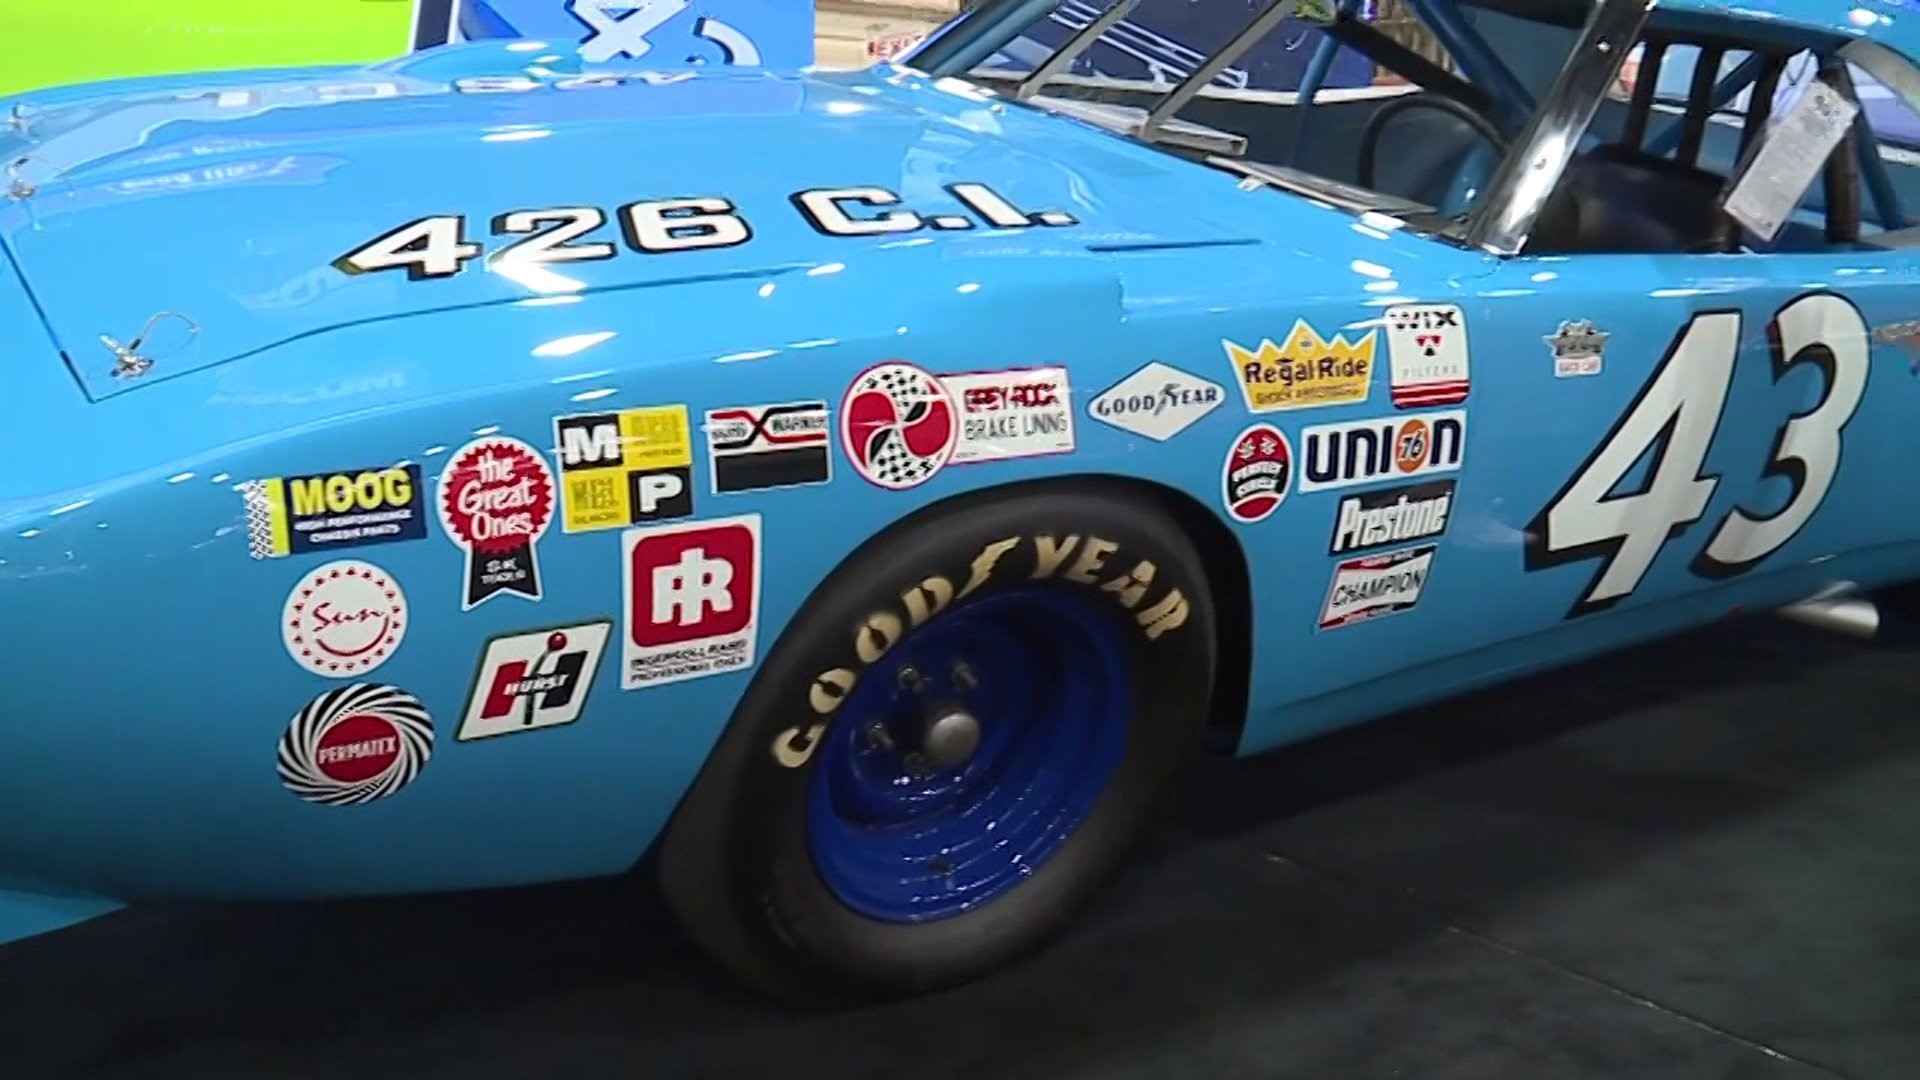 Mecum Auctions is in Harrisburg for a sixth straight year